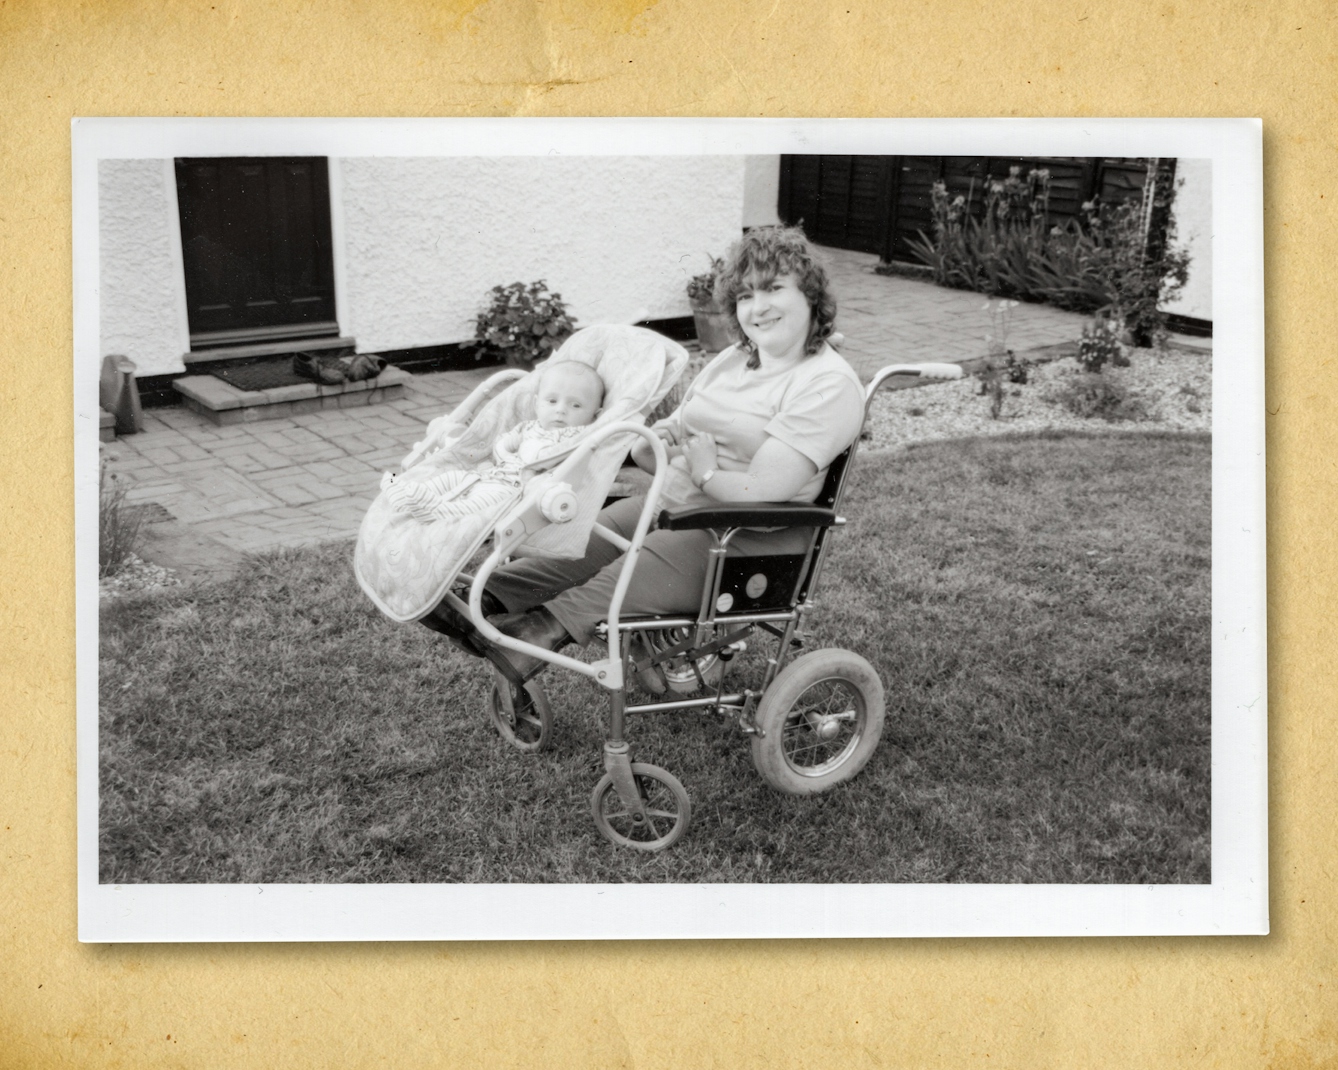 Photograph of a black and white photographic print, resting on a brown paper textured background. The print shows a garden scene with a grass lawn and part of a white rendered house and black door. In the centre of the image is a woman seated in a wheelchair. Her arms and legs are short as a result of her mother being prescribed thalidomide when she was pregnant. Attached to the front of her wheelchair is a baby carrier with a small baby strapped in. Both are looking towards camera, the mother smiling.